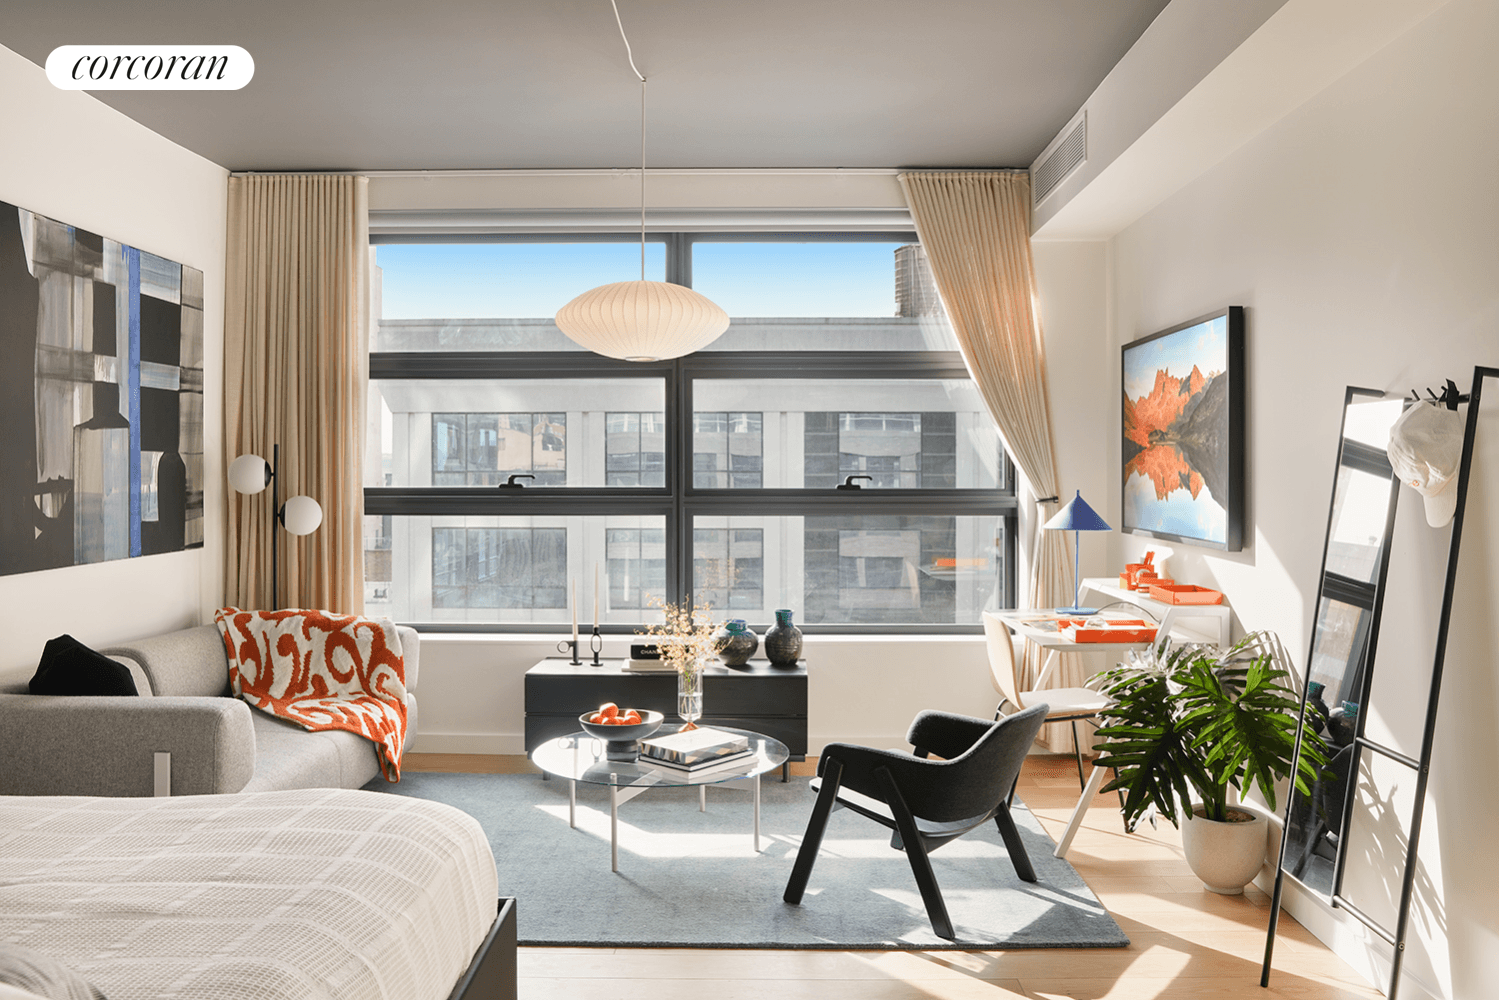 547 West 47th Street, 608The West Residence Club, Hell's Kitchen, New York, NY 10036547 West 47th Street offers lifestyle driven condominium residences with architecture and interiors by the innovative Dutch ...